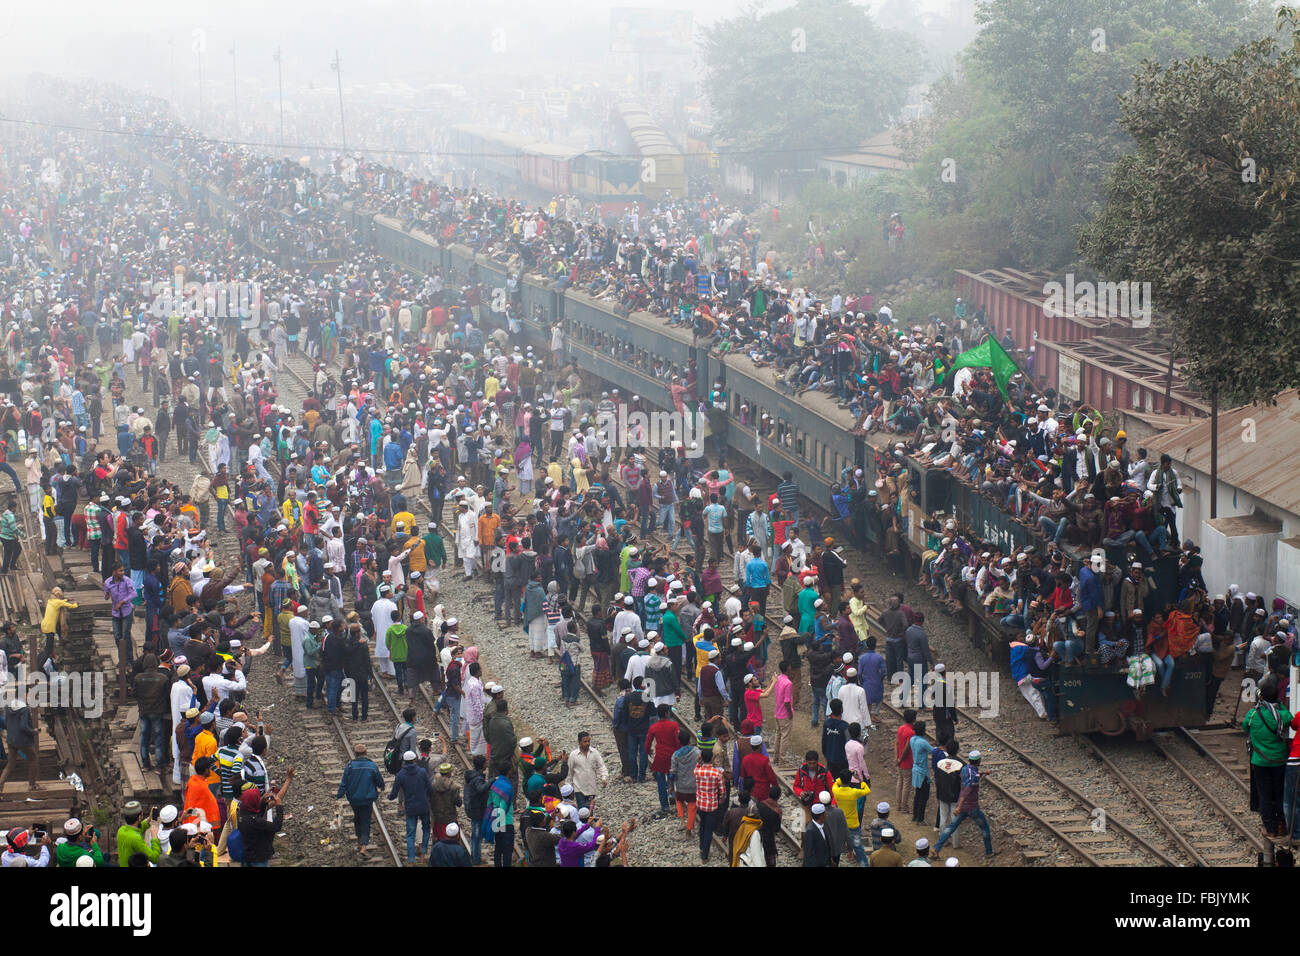 DHAKA, BANGLADESH 10th January 2016:Bangladeshi Muslim devotees board trains after attending the Akheri Munajat concluding prayers on the third day of Biswa Ijtema, the second largest Muslim congregation after the Hajj, at Tongi Railway station in Tongi 20 km from Dhaka on January 10, 2016. Around two million Muslims from Bangladesh and abroad observed the three-day congregation with prayers on the banks of the Turag River. Stock Photo